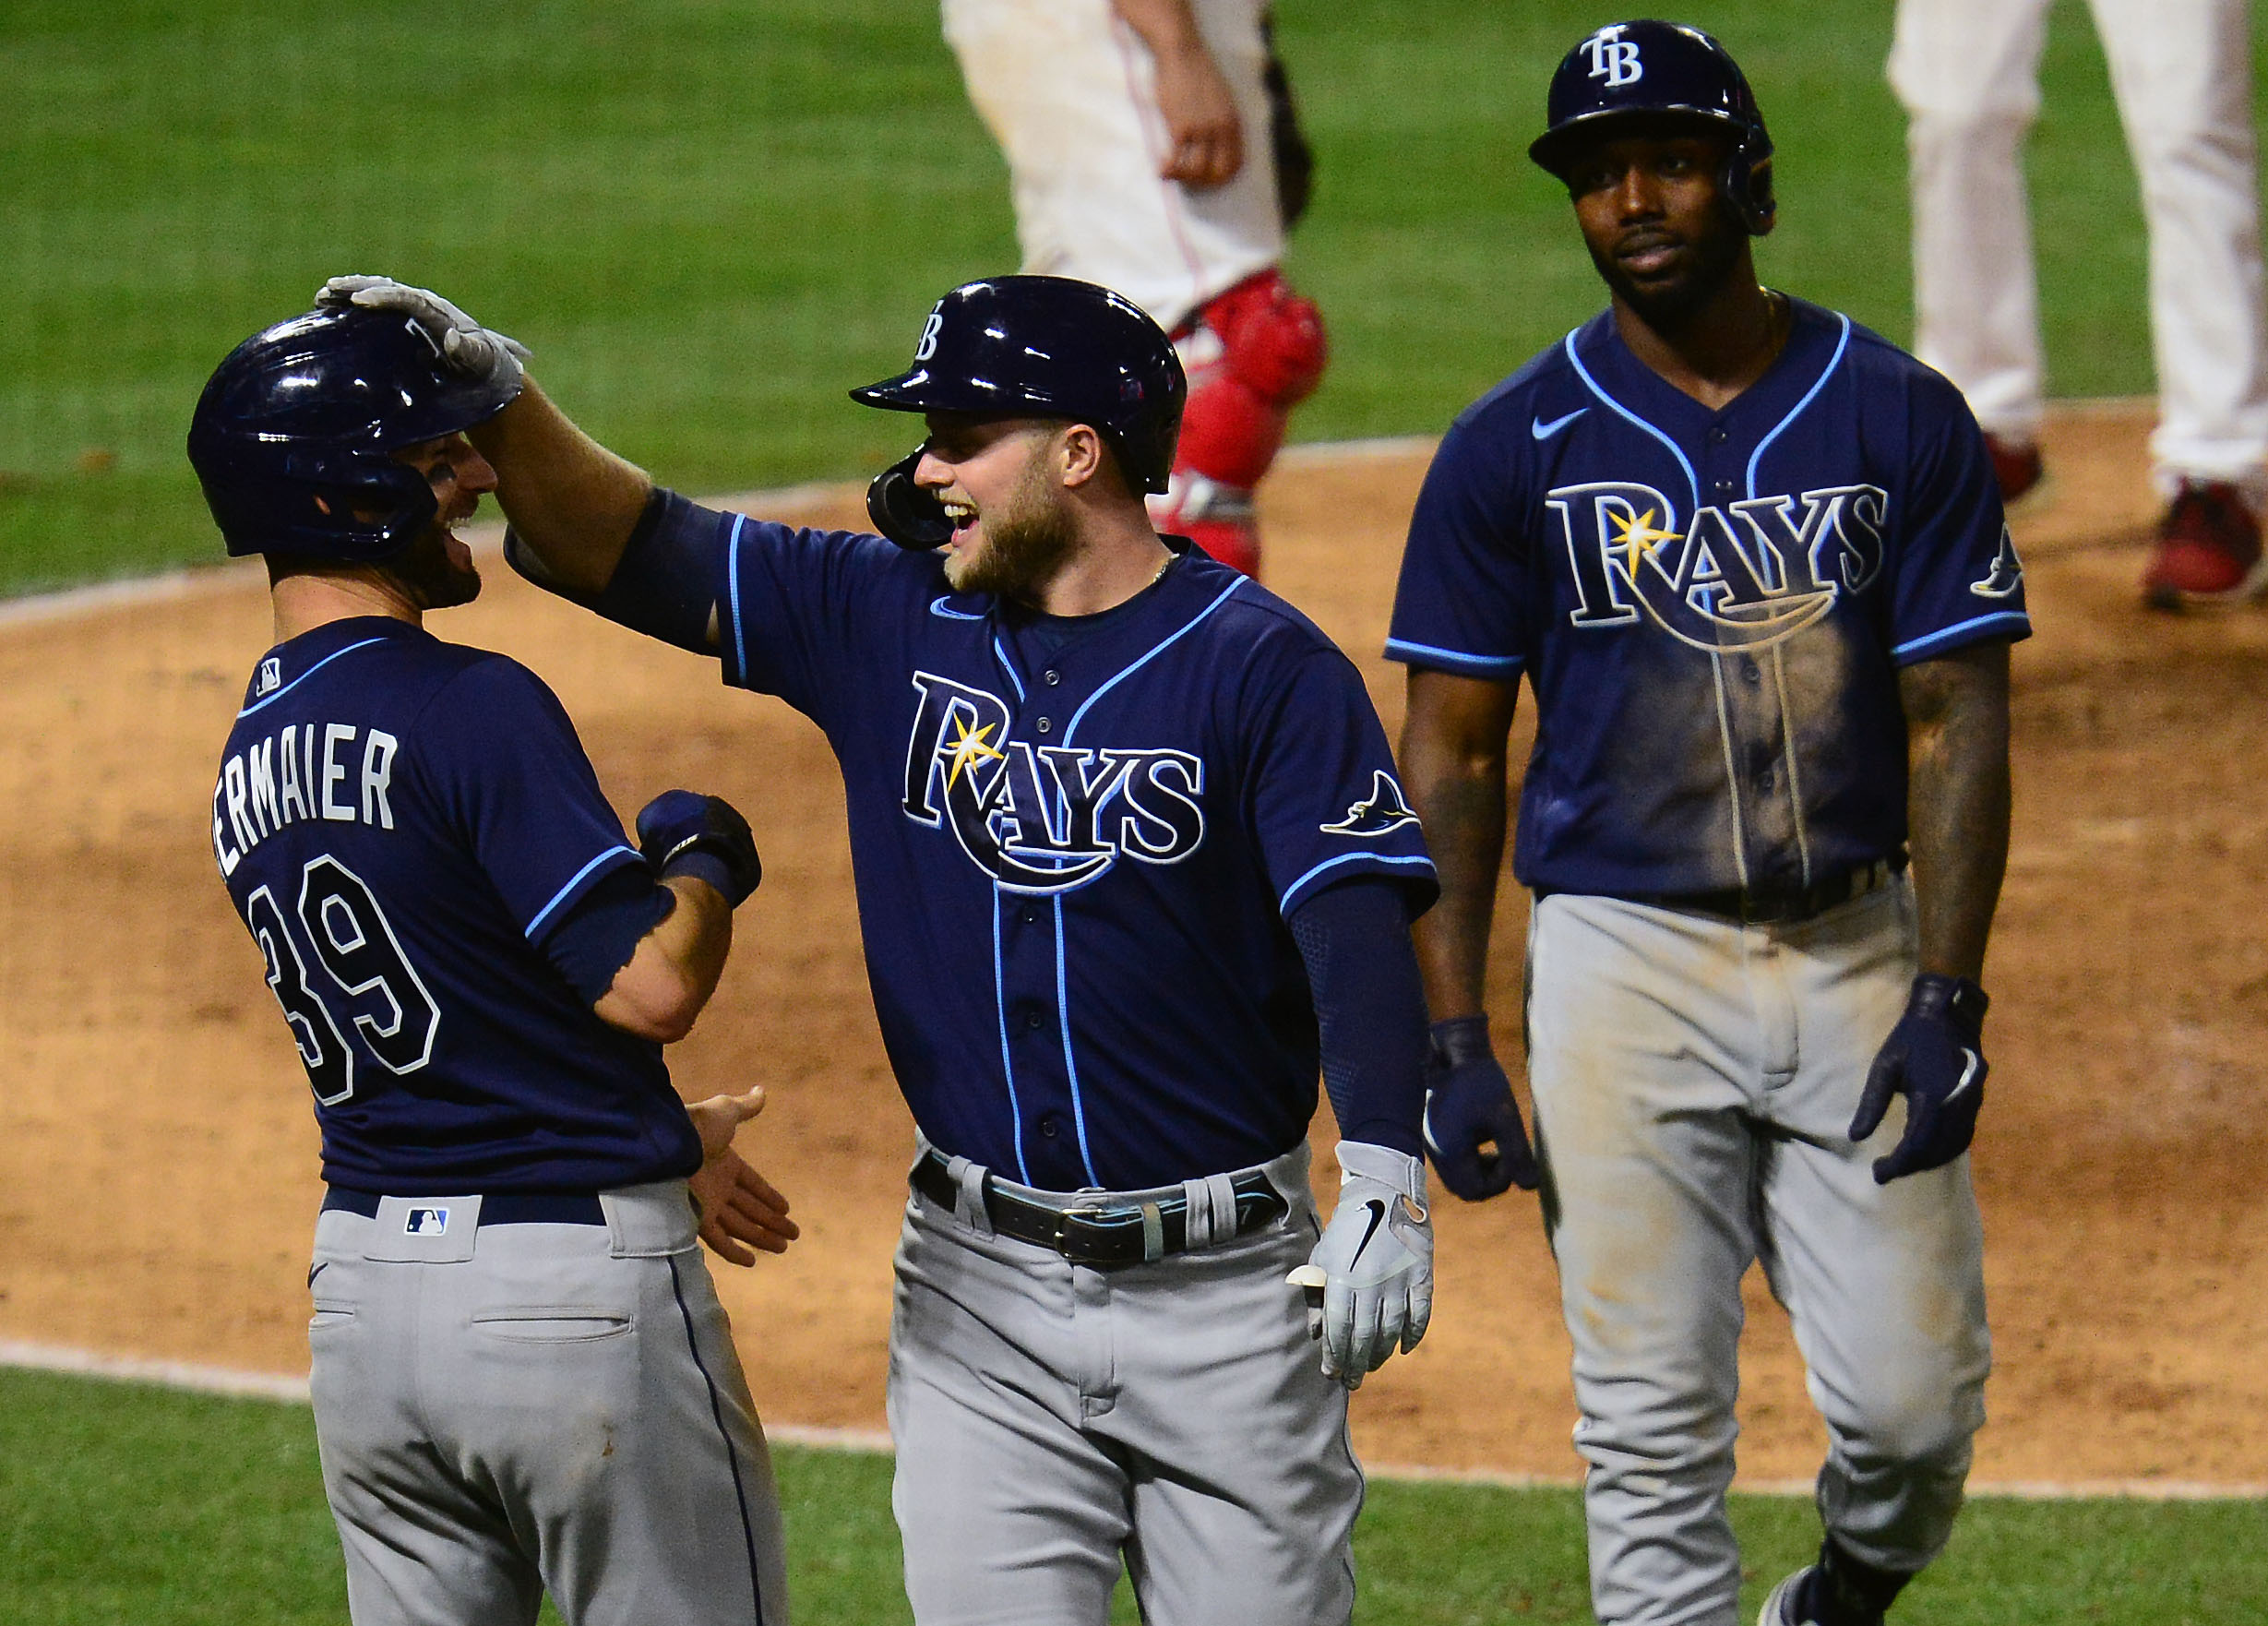 Tampa Bay Rays designated hitter Austin Meadows is greeted by left fielder Randy Arozarena and center fielder Kevin Kiermaier after hitting a three run home run against the Los Angeles Angels during the eighth inning at Angel Stadium.